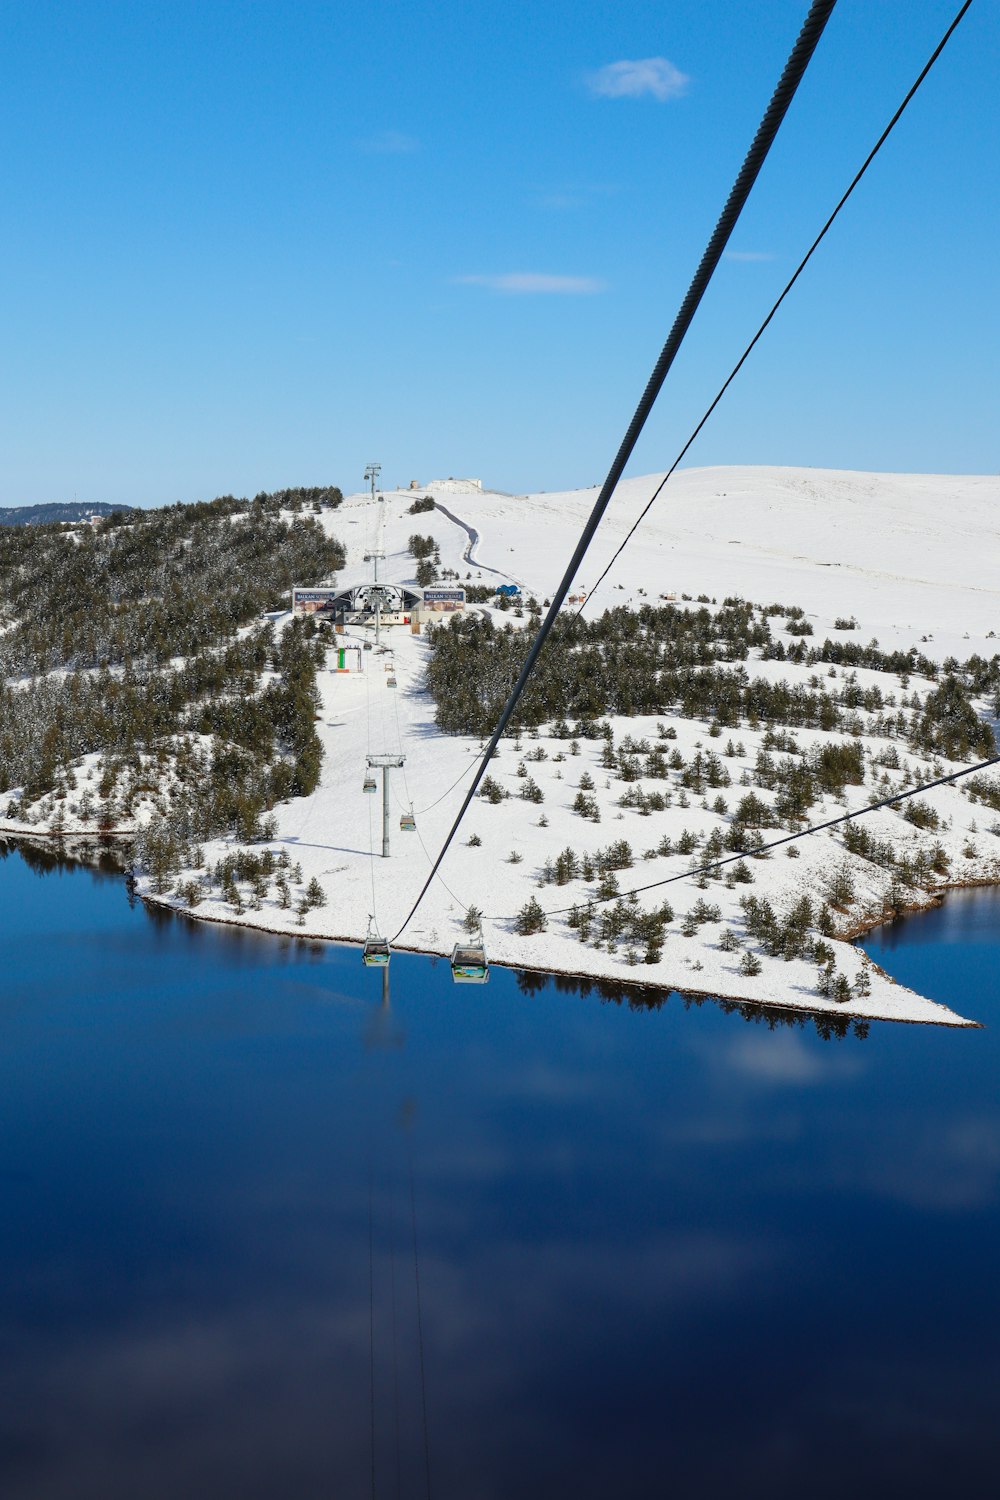 an aerial view of a ski resort and lake